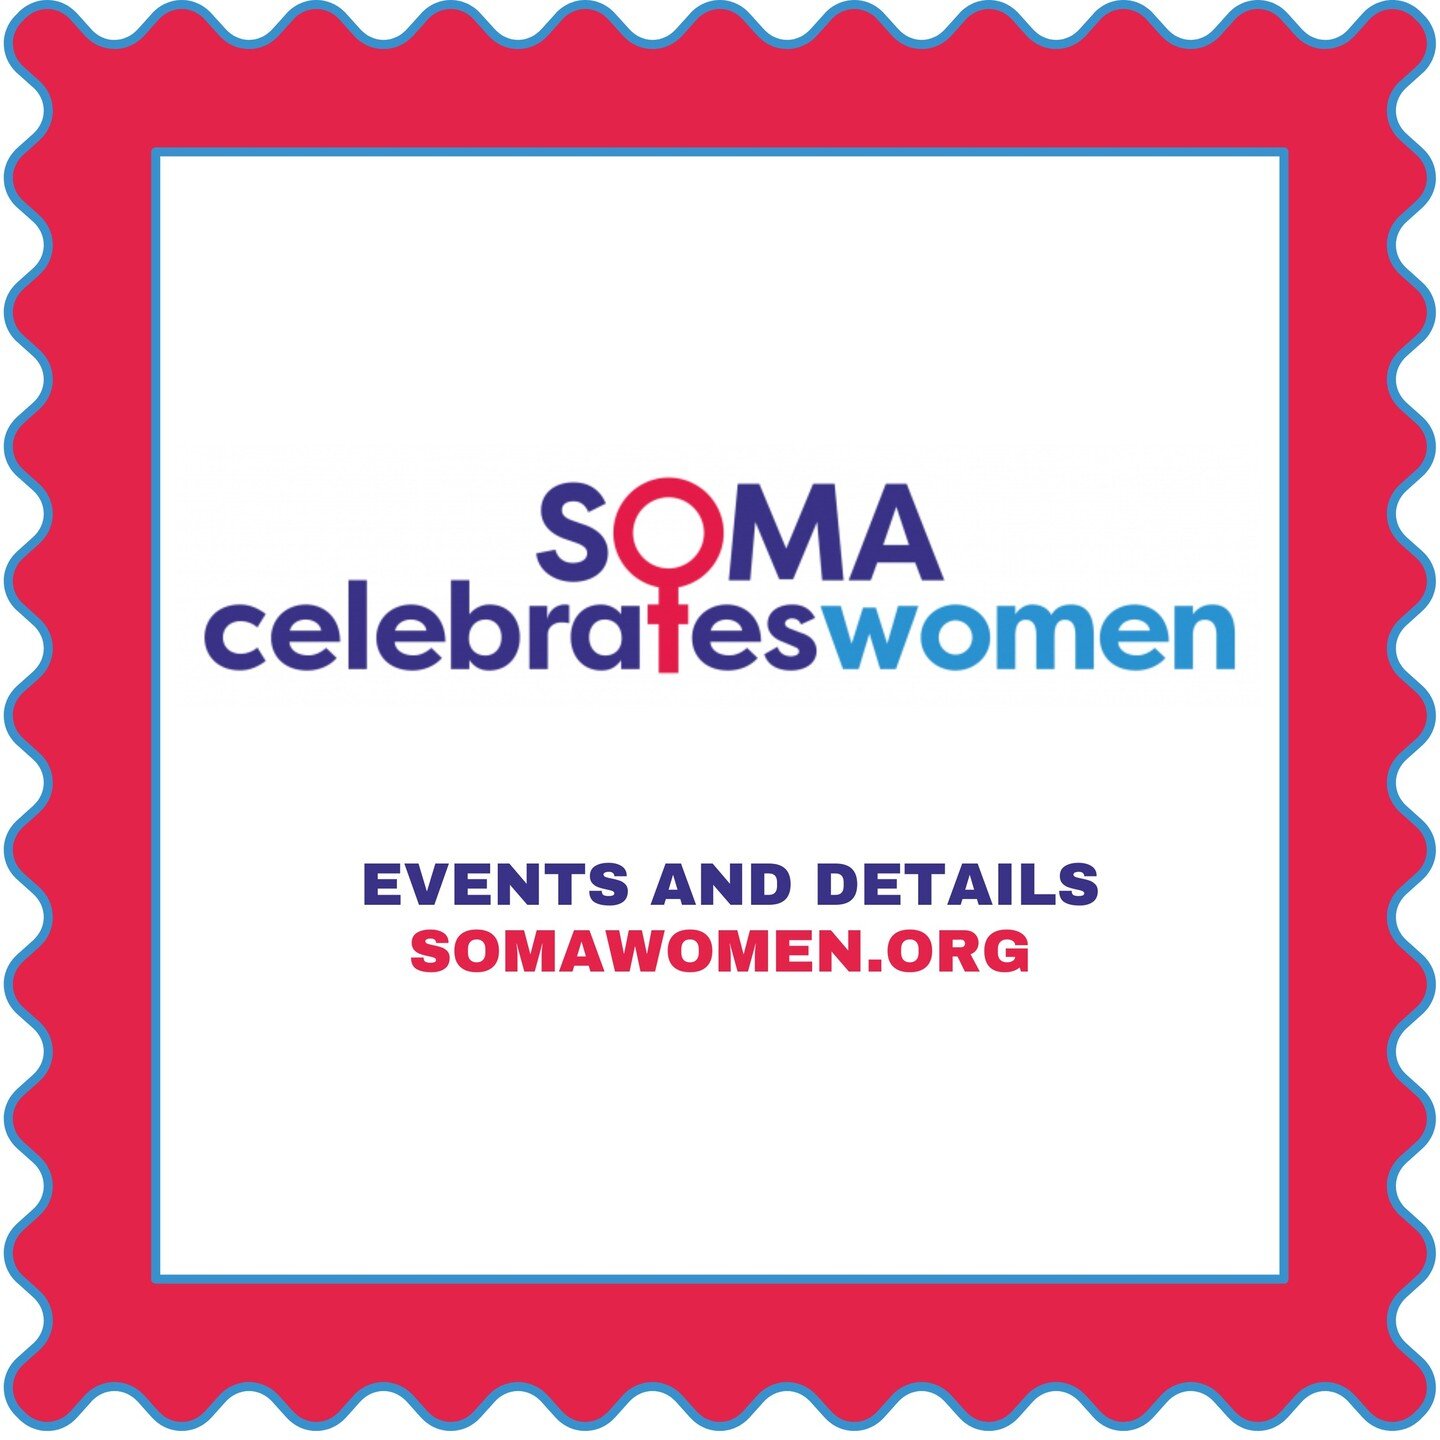 Come and Celebrate Women's History Month 2024 with us!

See the listing of events in SOMAcelebrateswomen
Link in Bio

#WomensHistoryMonth
#WomenInHistory
#HerStory
#WomenEmpowerment
#Feminism
#WomenWhoLead
#InspirationalWomen
#StrongWomen